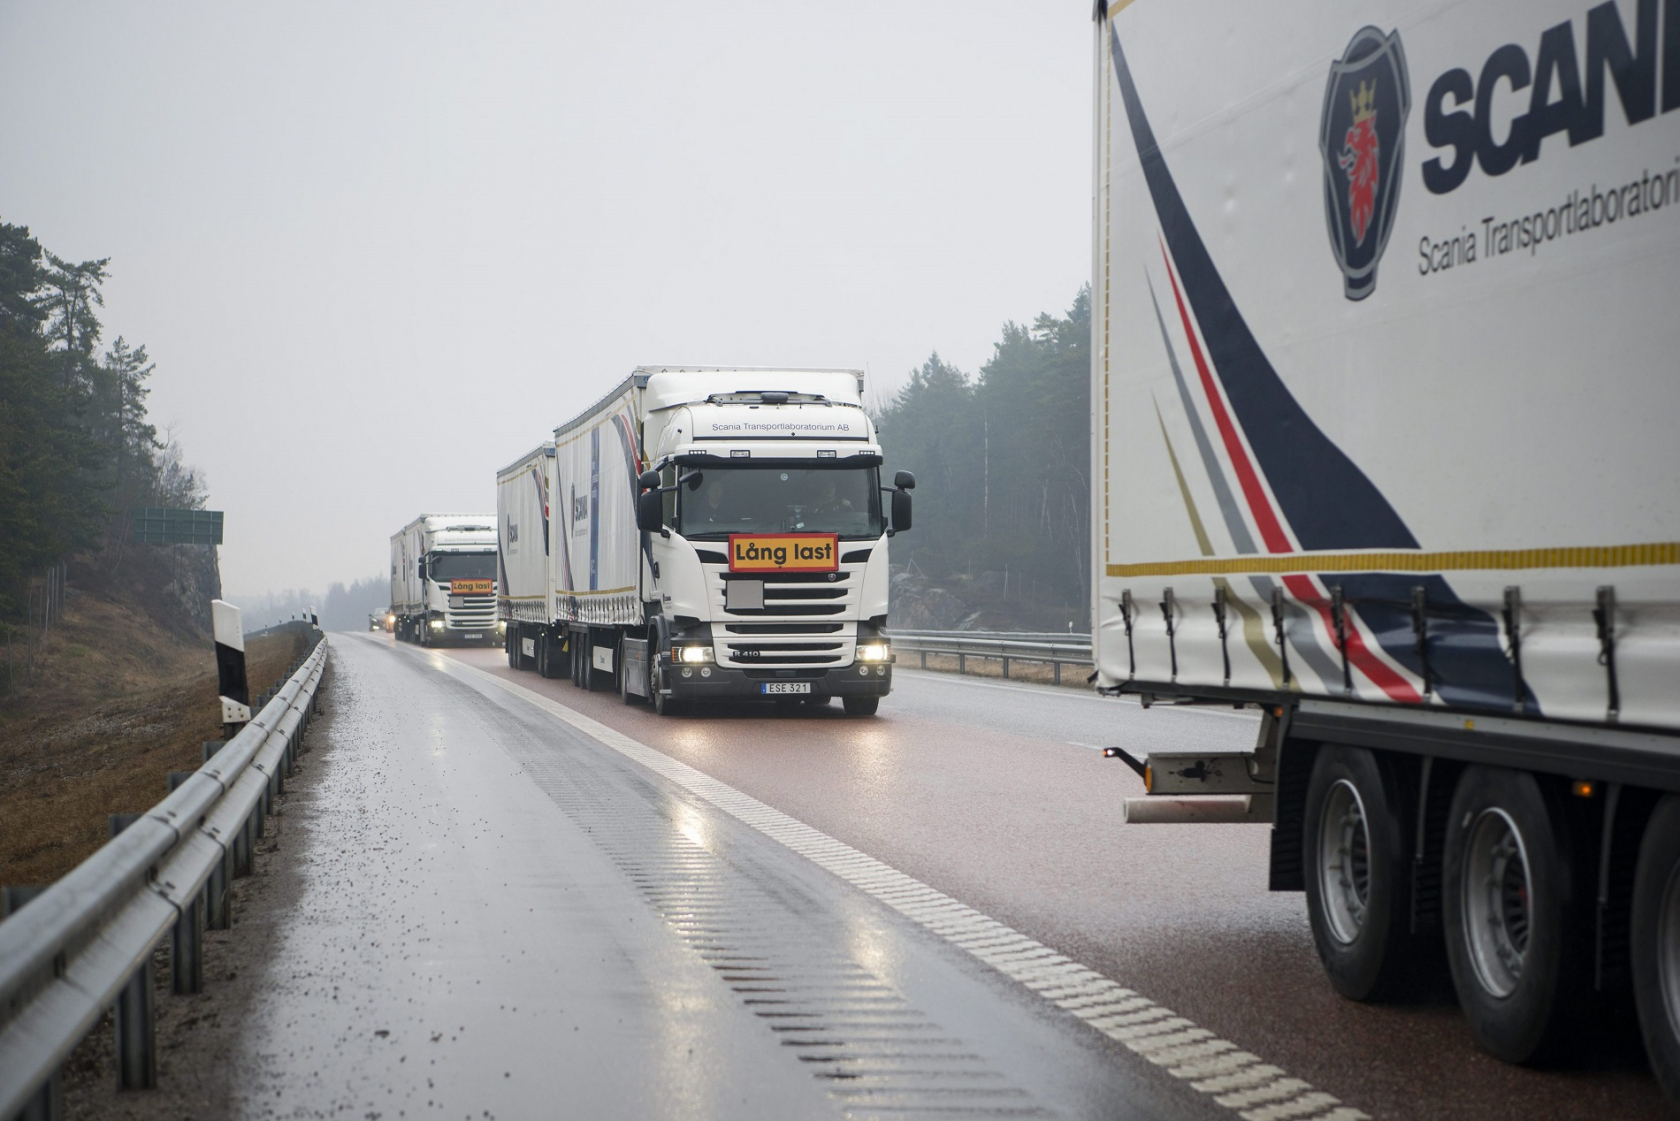 The UK to start testing 'self-driving' truck convoys